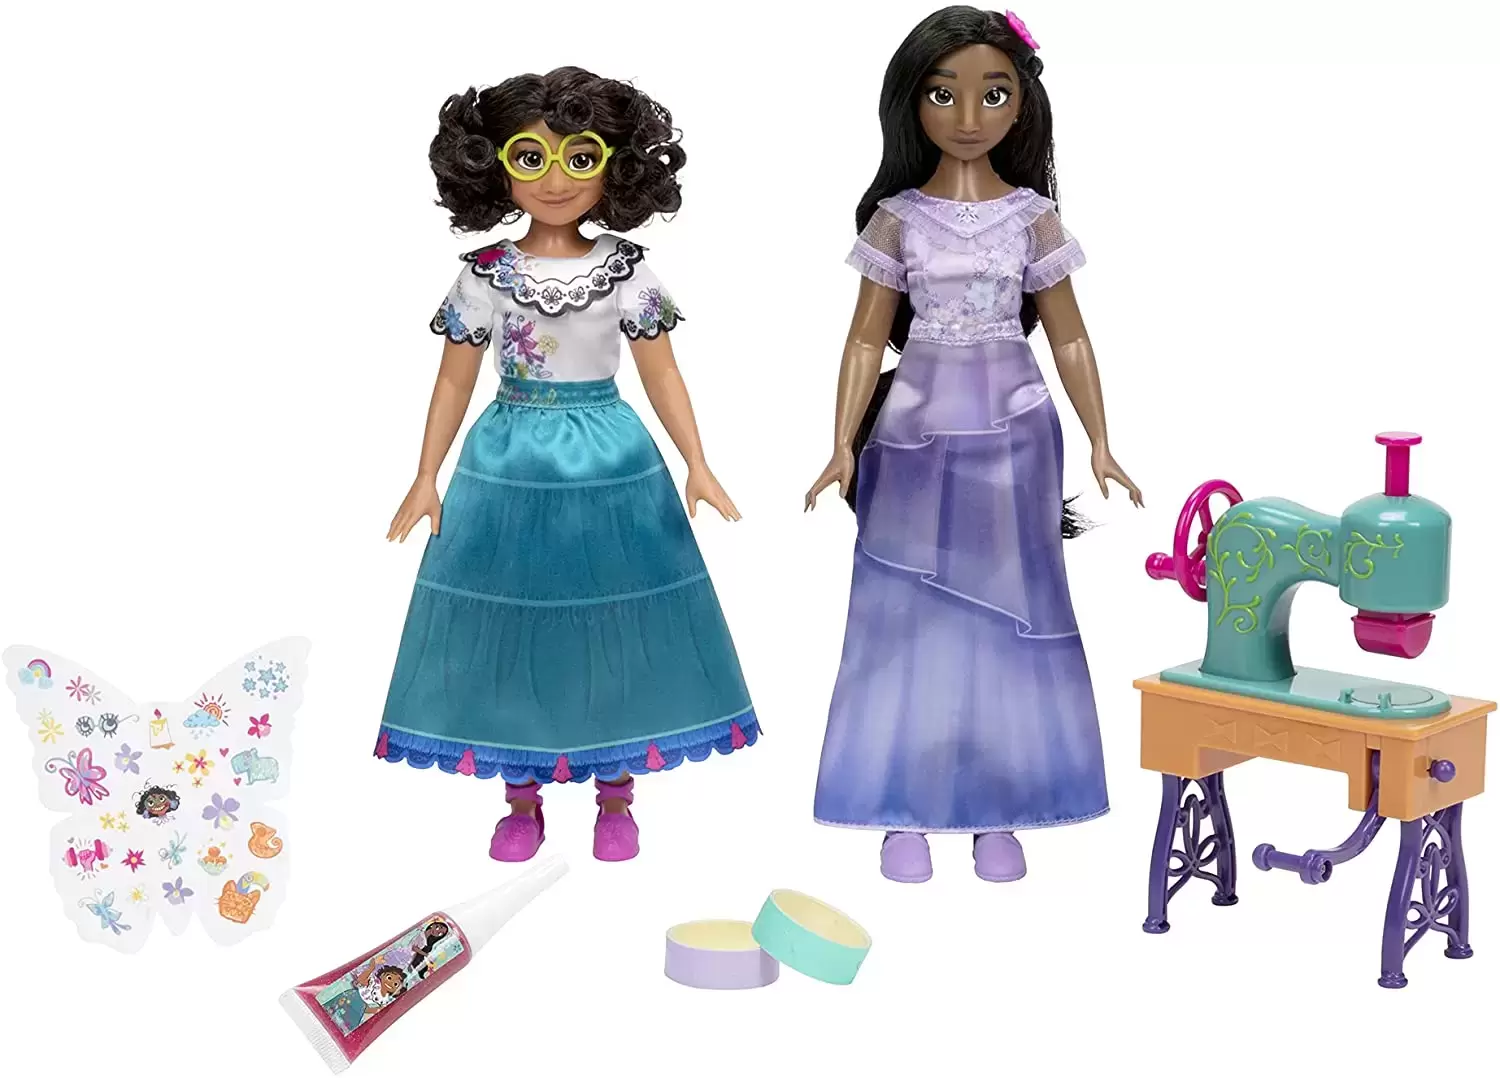 Encanto Dolls & Playsets - Petite Raya and Friends Gift Set